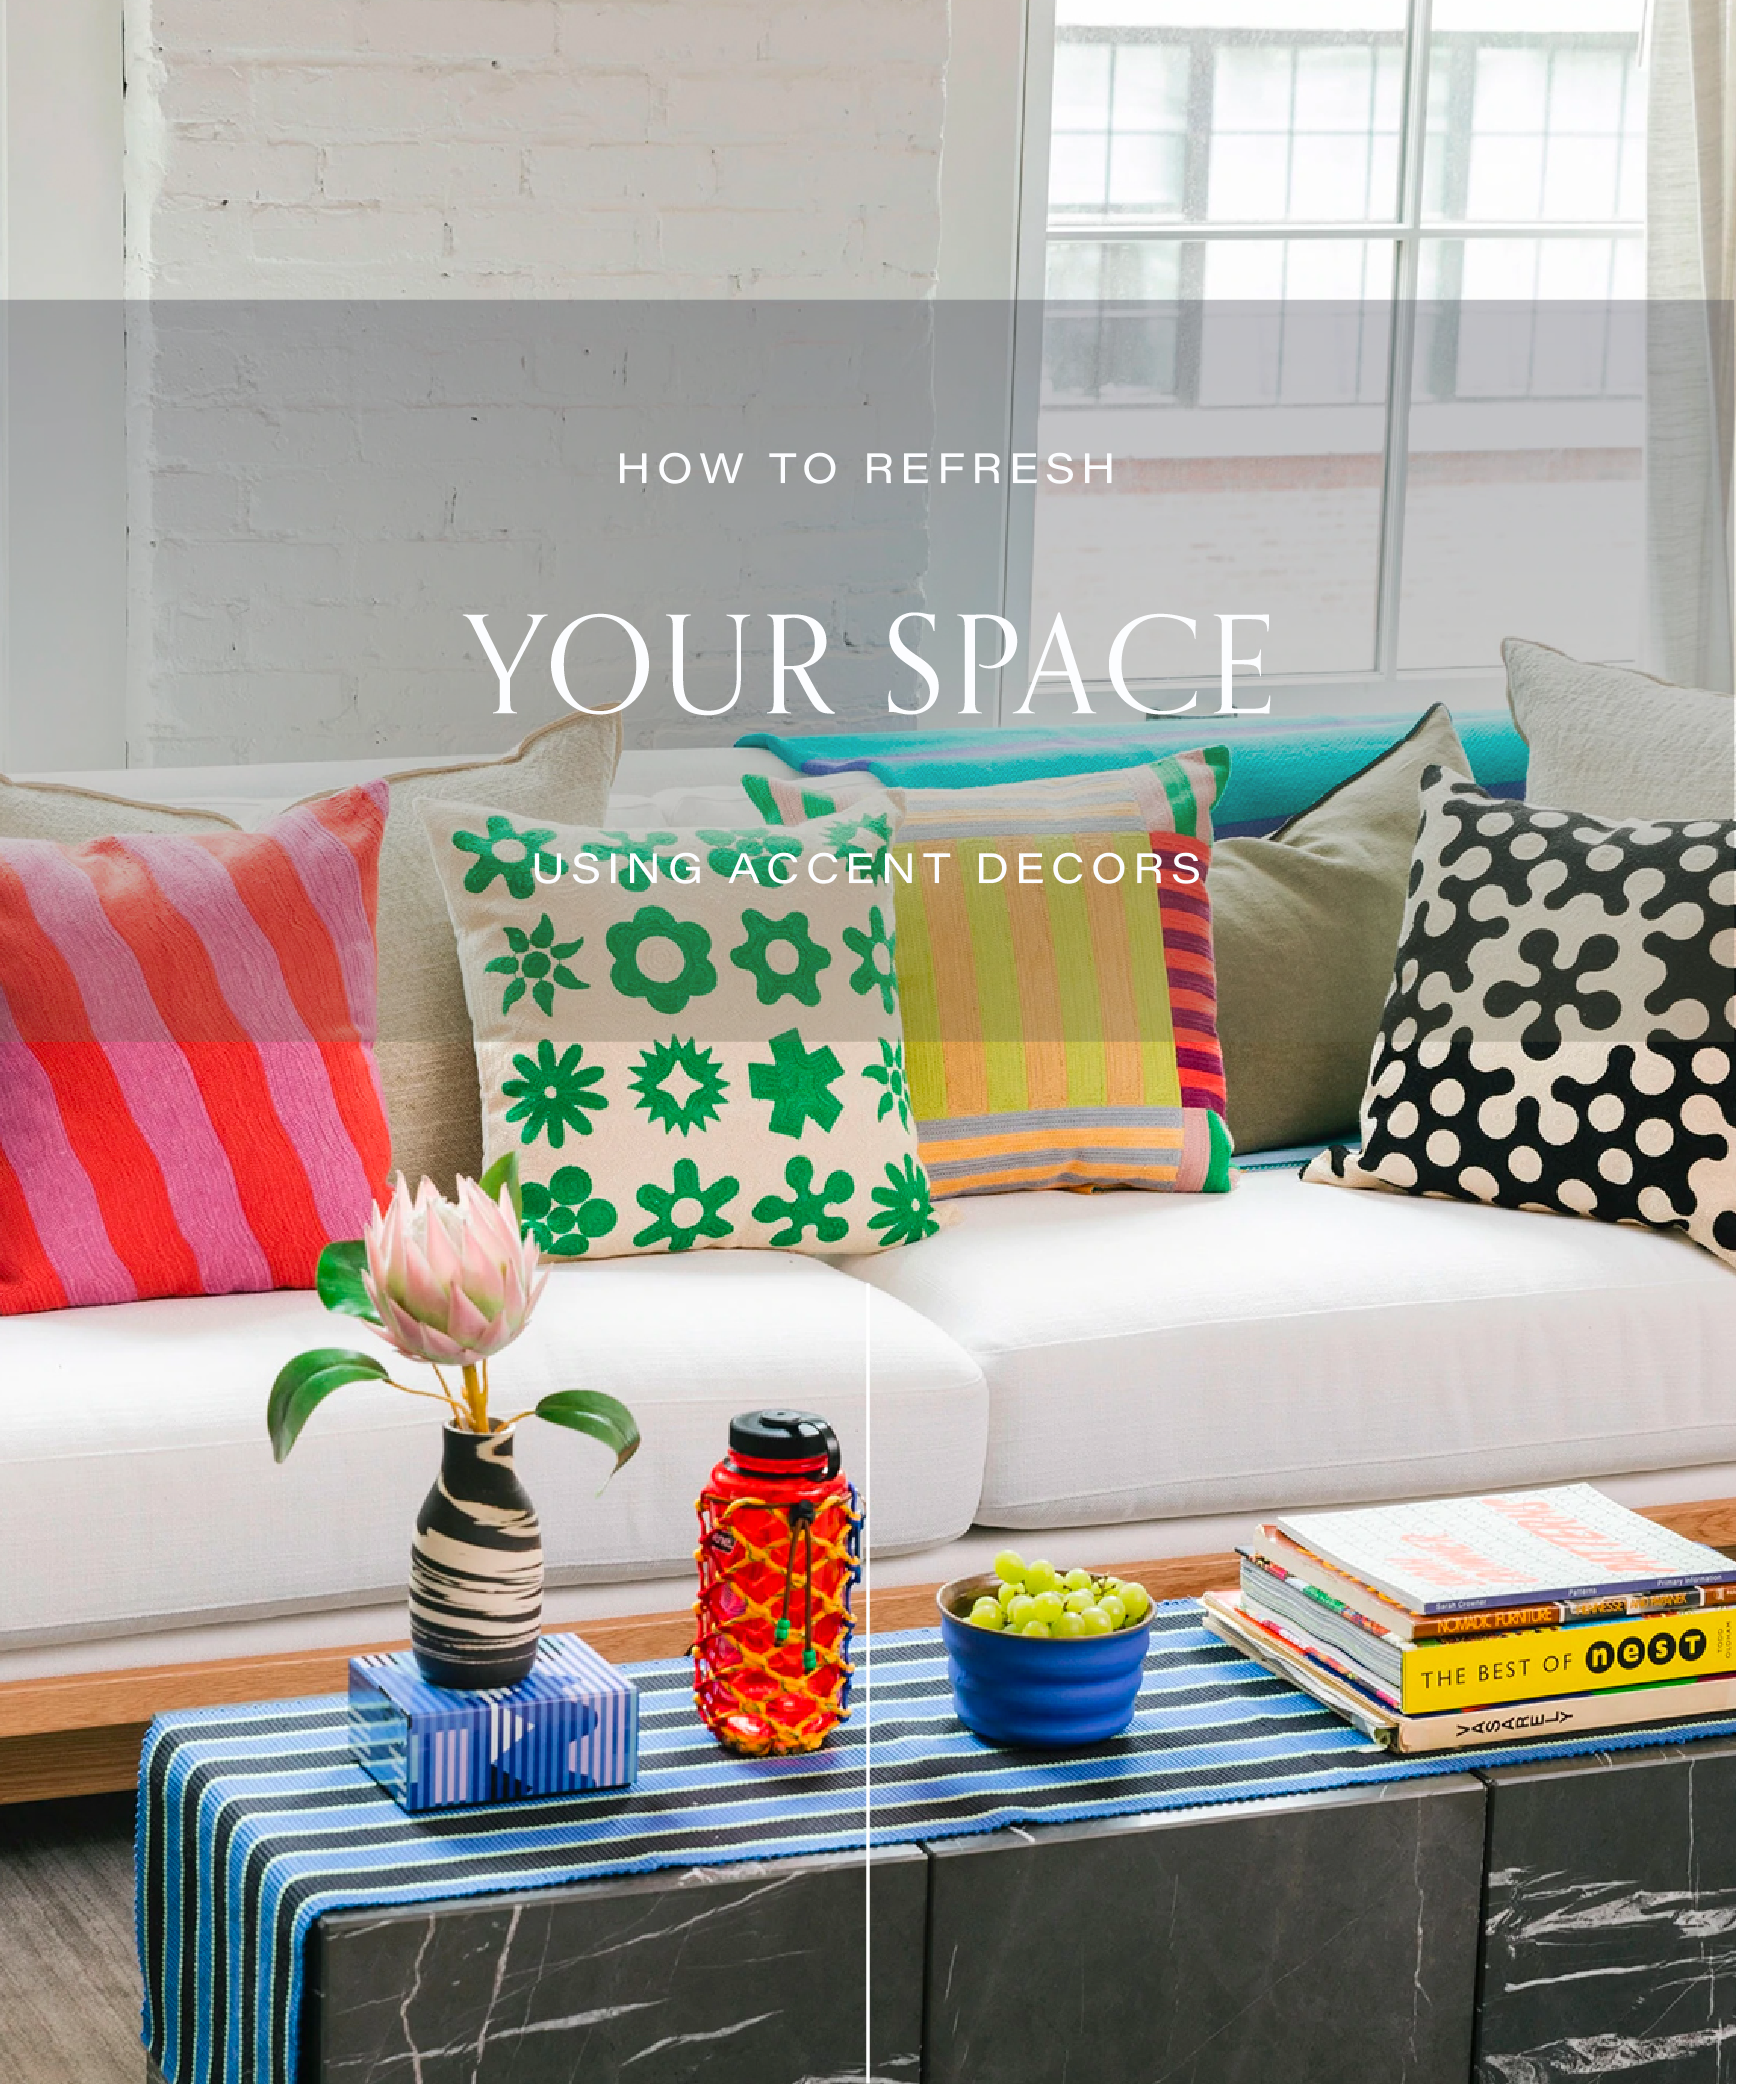 How to Refresh Your Space Using Accent Decors